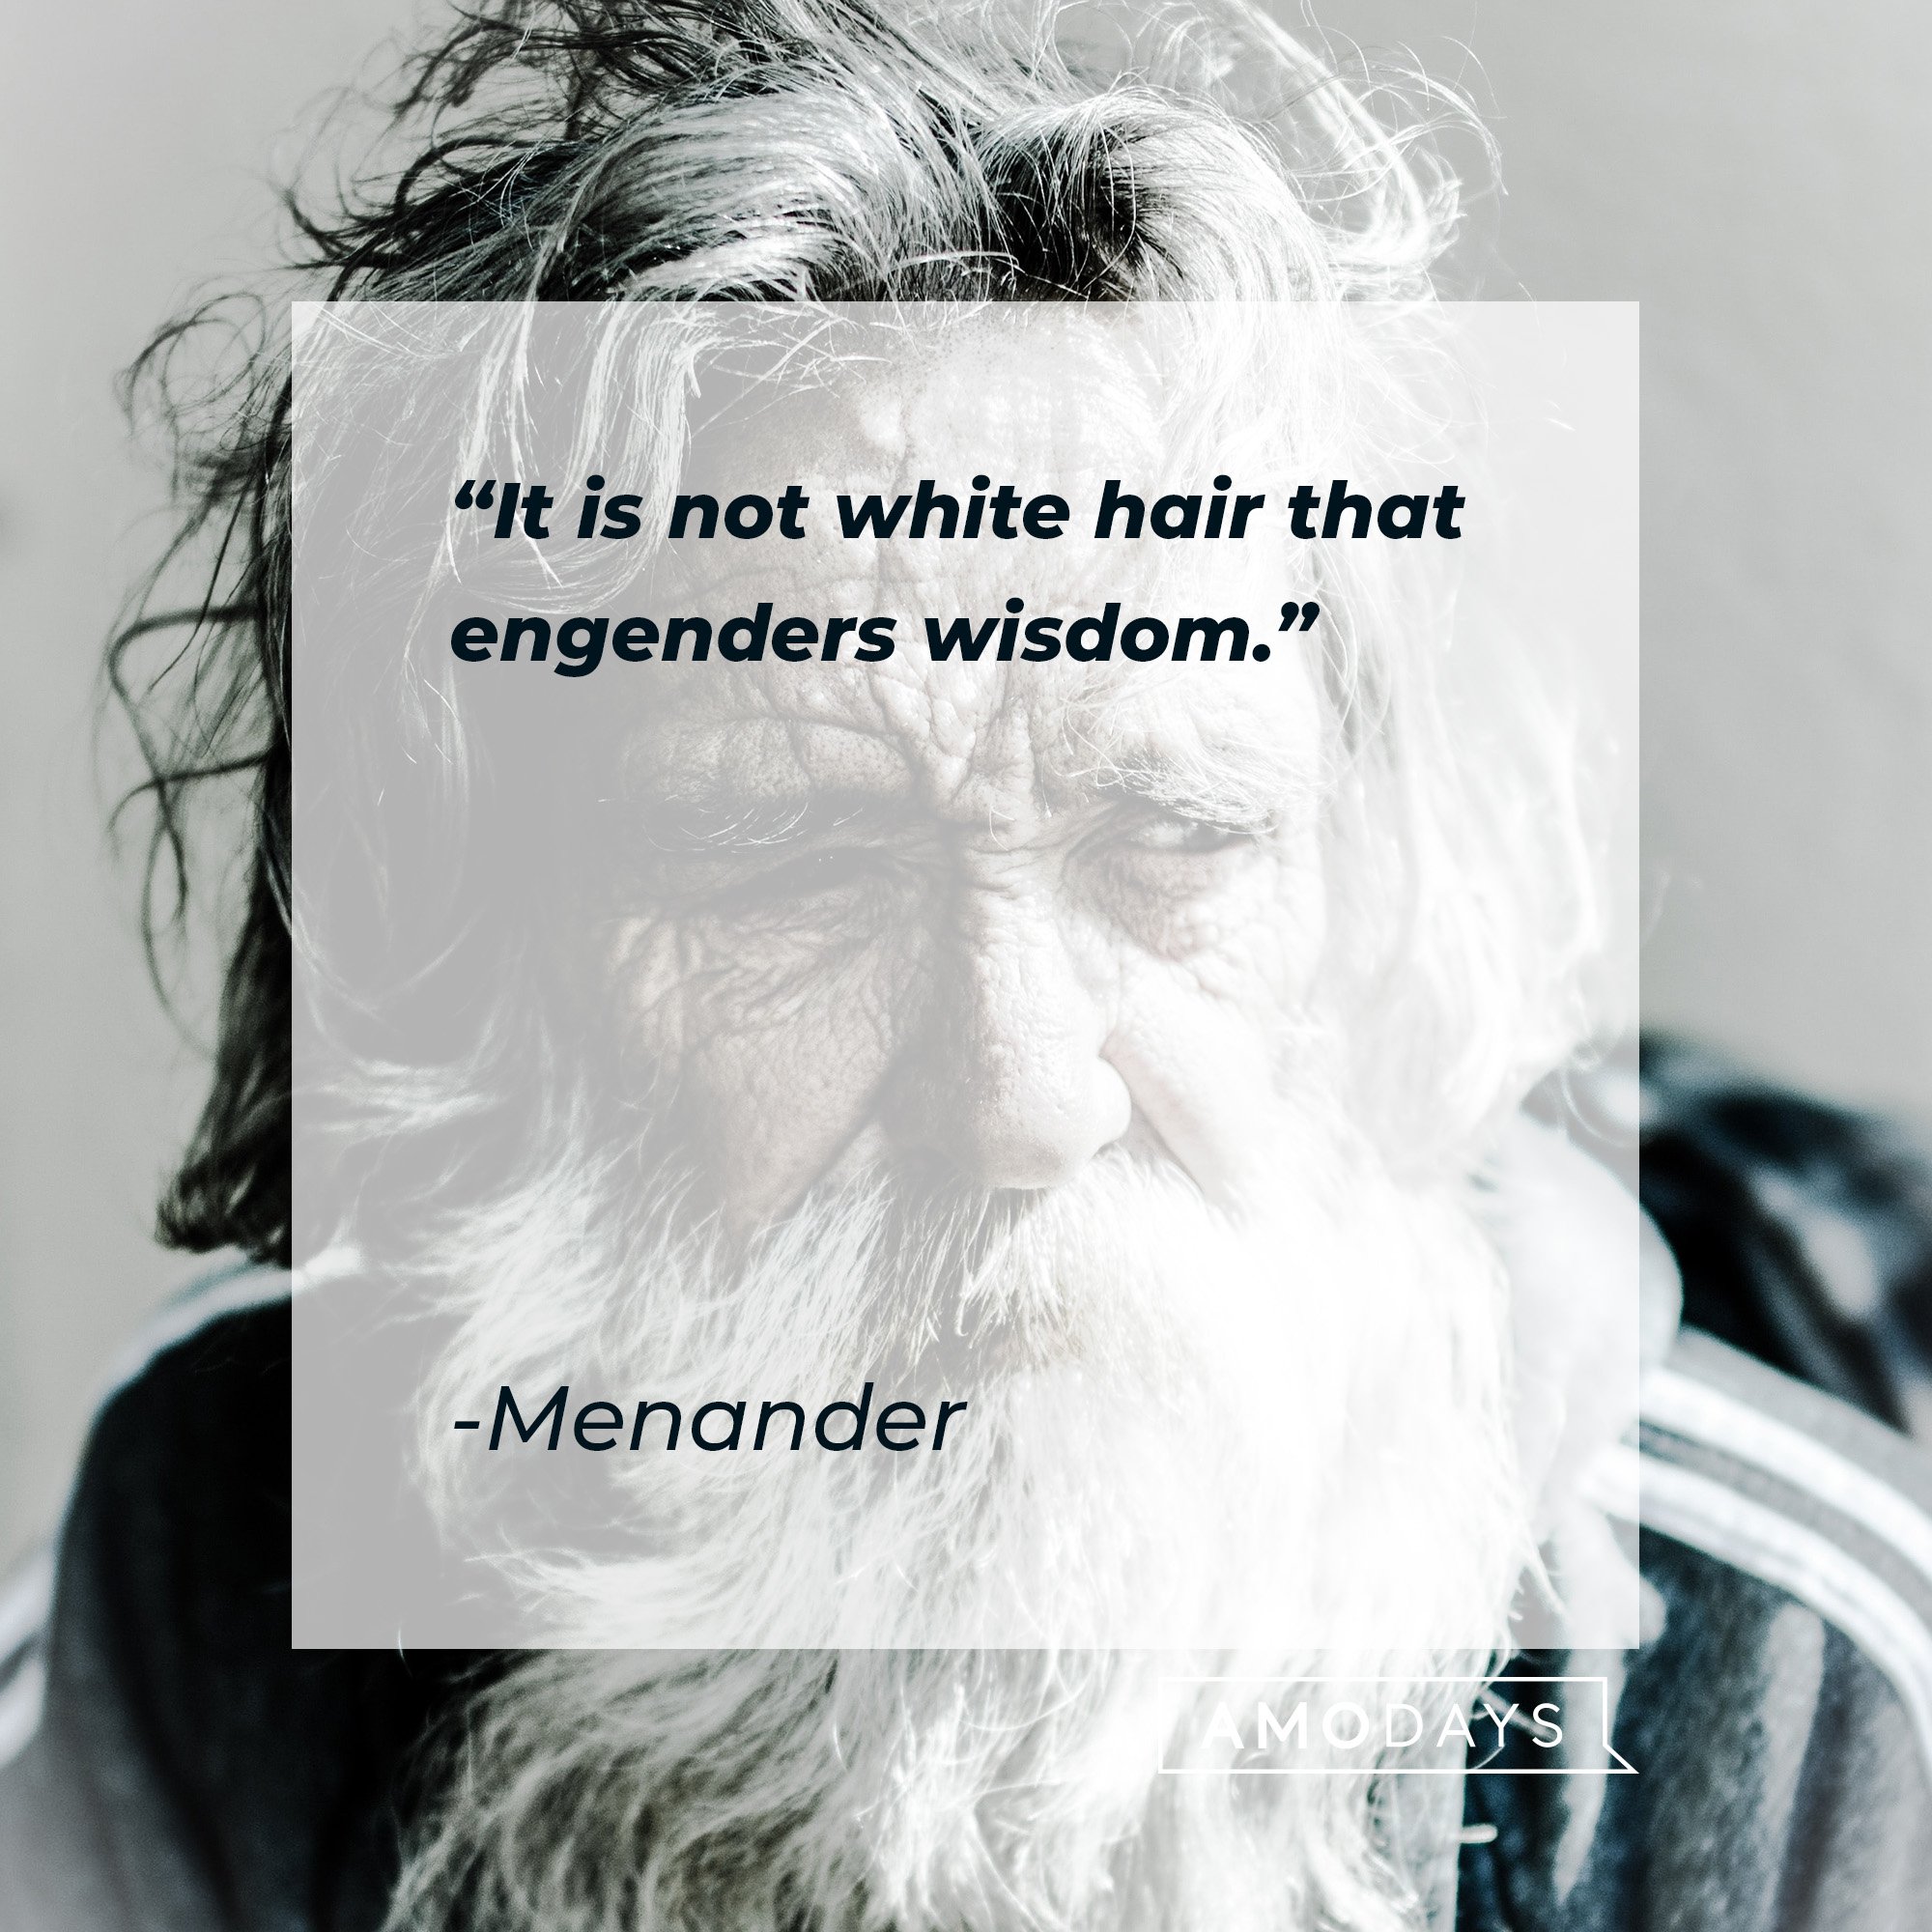 Menander’s quote: "It is not white hair that engenders wisdom." | Image: AmoDays